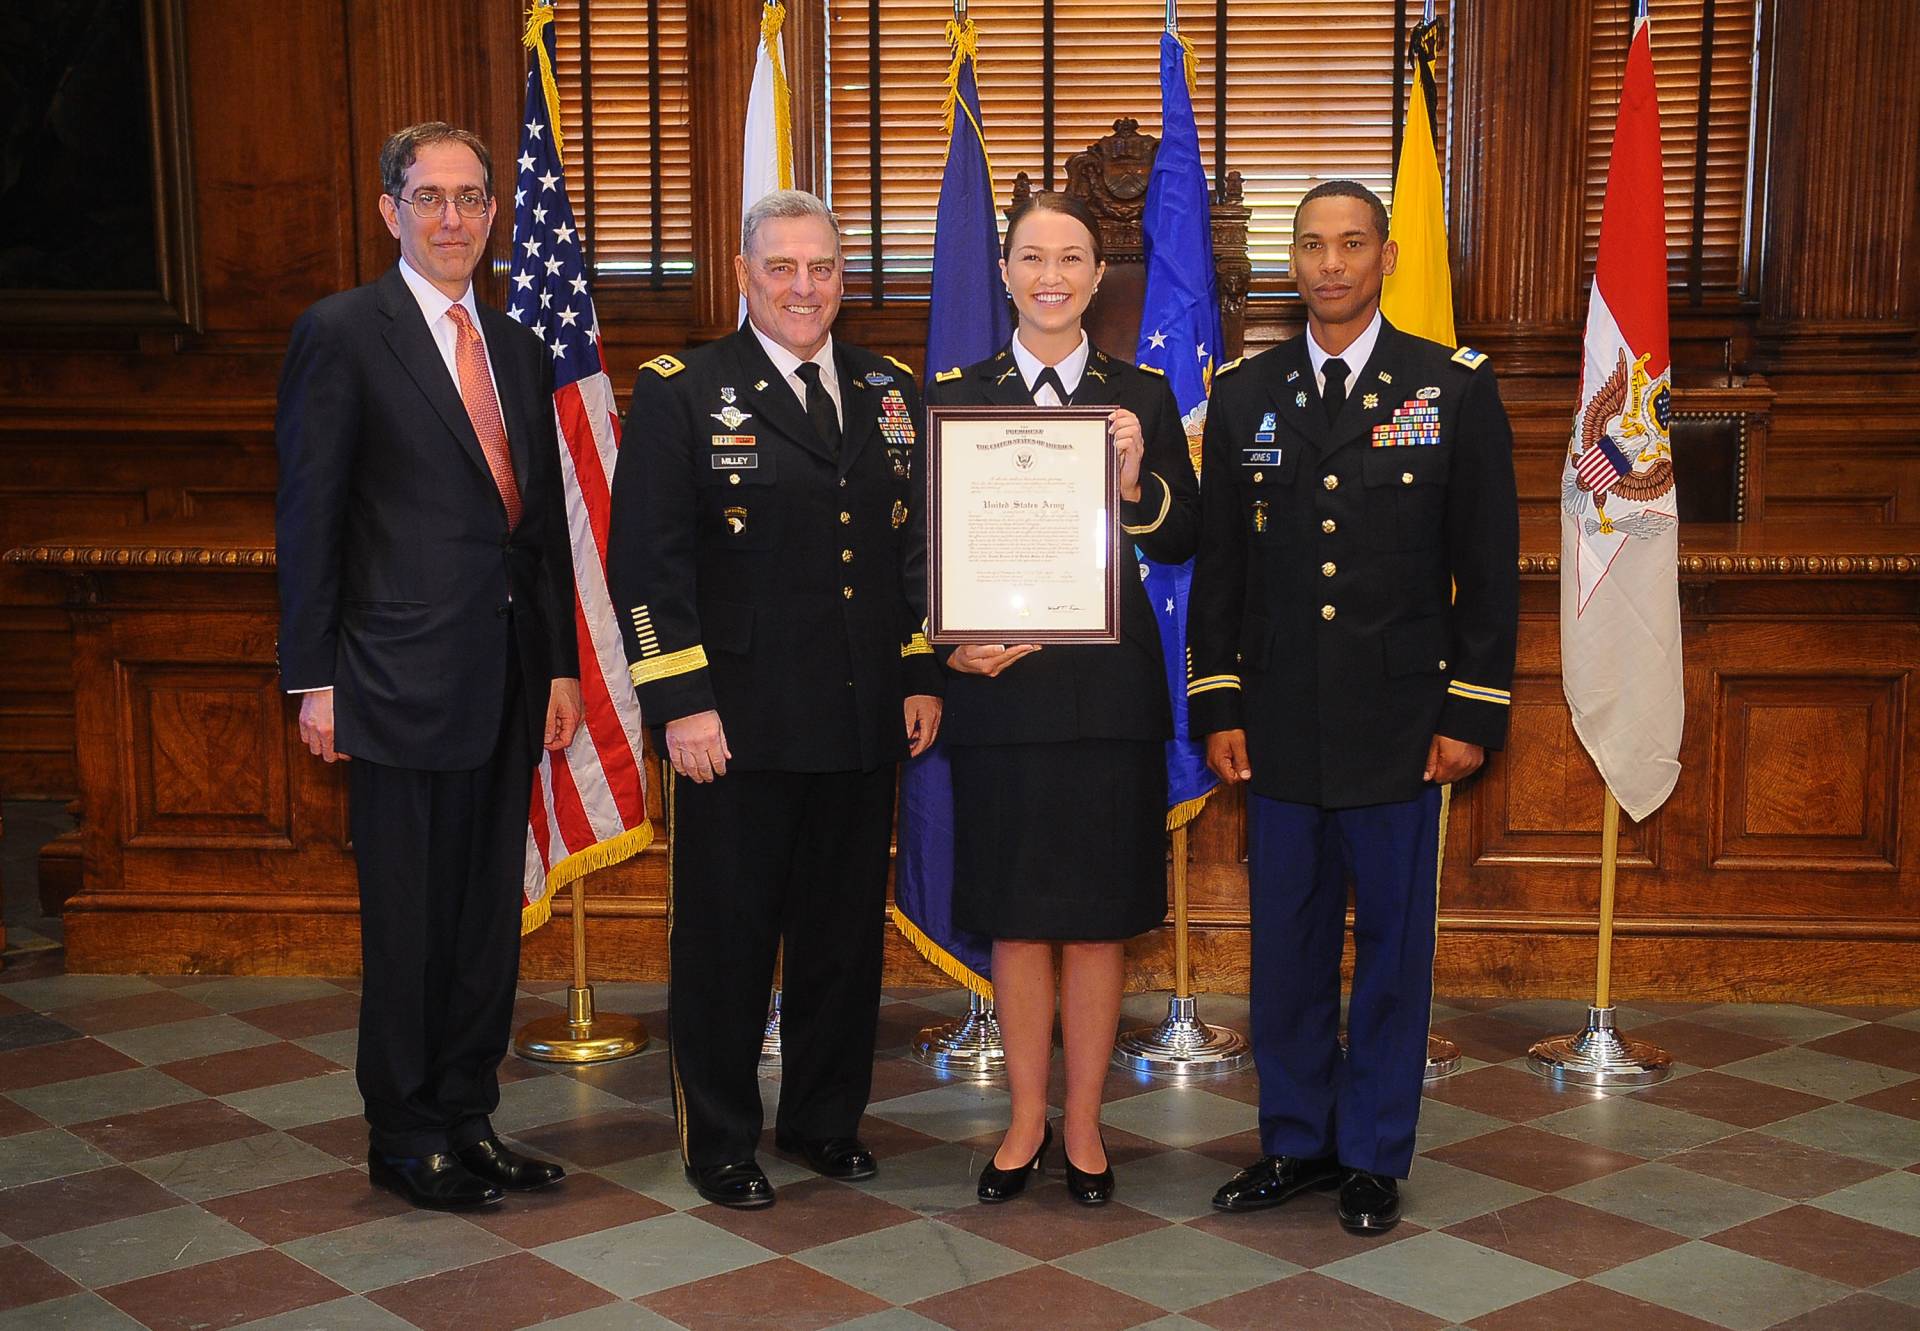 Princeton University President Christopher L. Eisgruber, Gen. Milley and Lt. Col. Courtney Jones, director of the Army Officer Education Program for Princeton’s Army ROTC Tiger Battalion